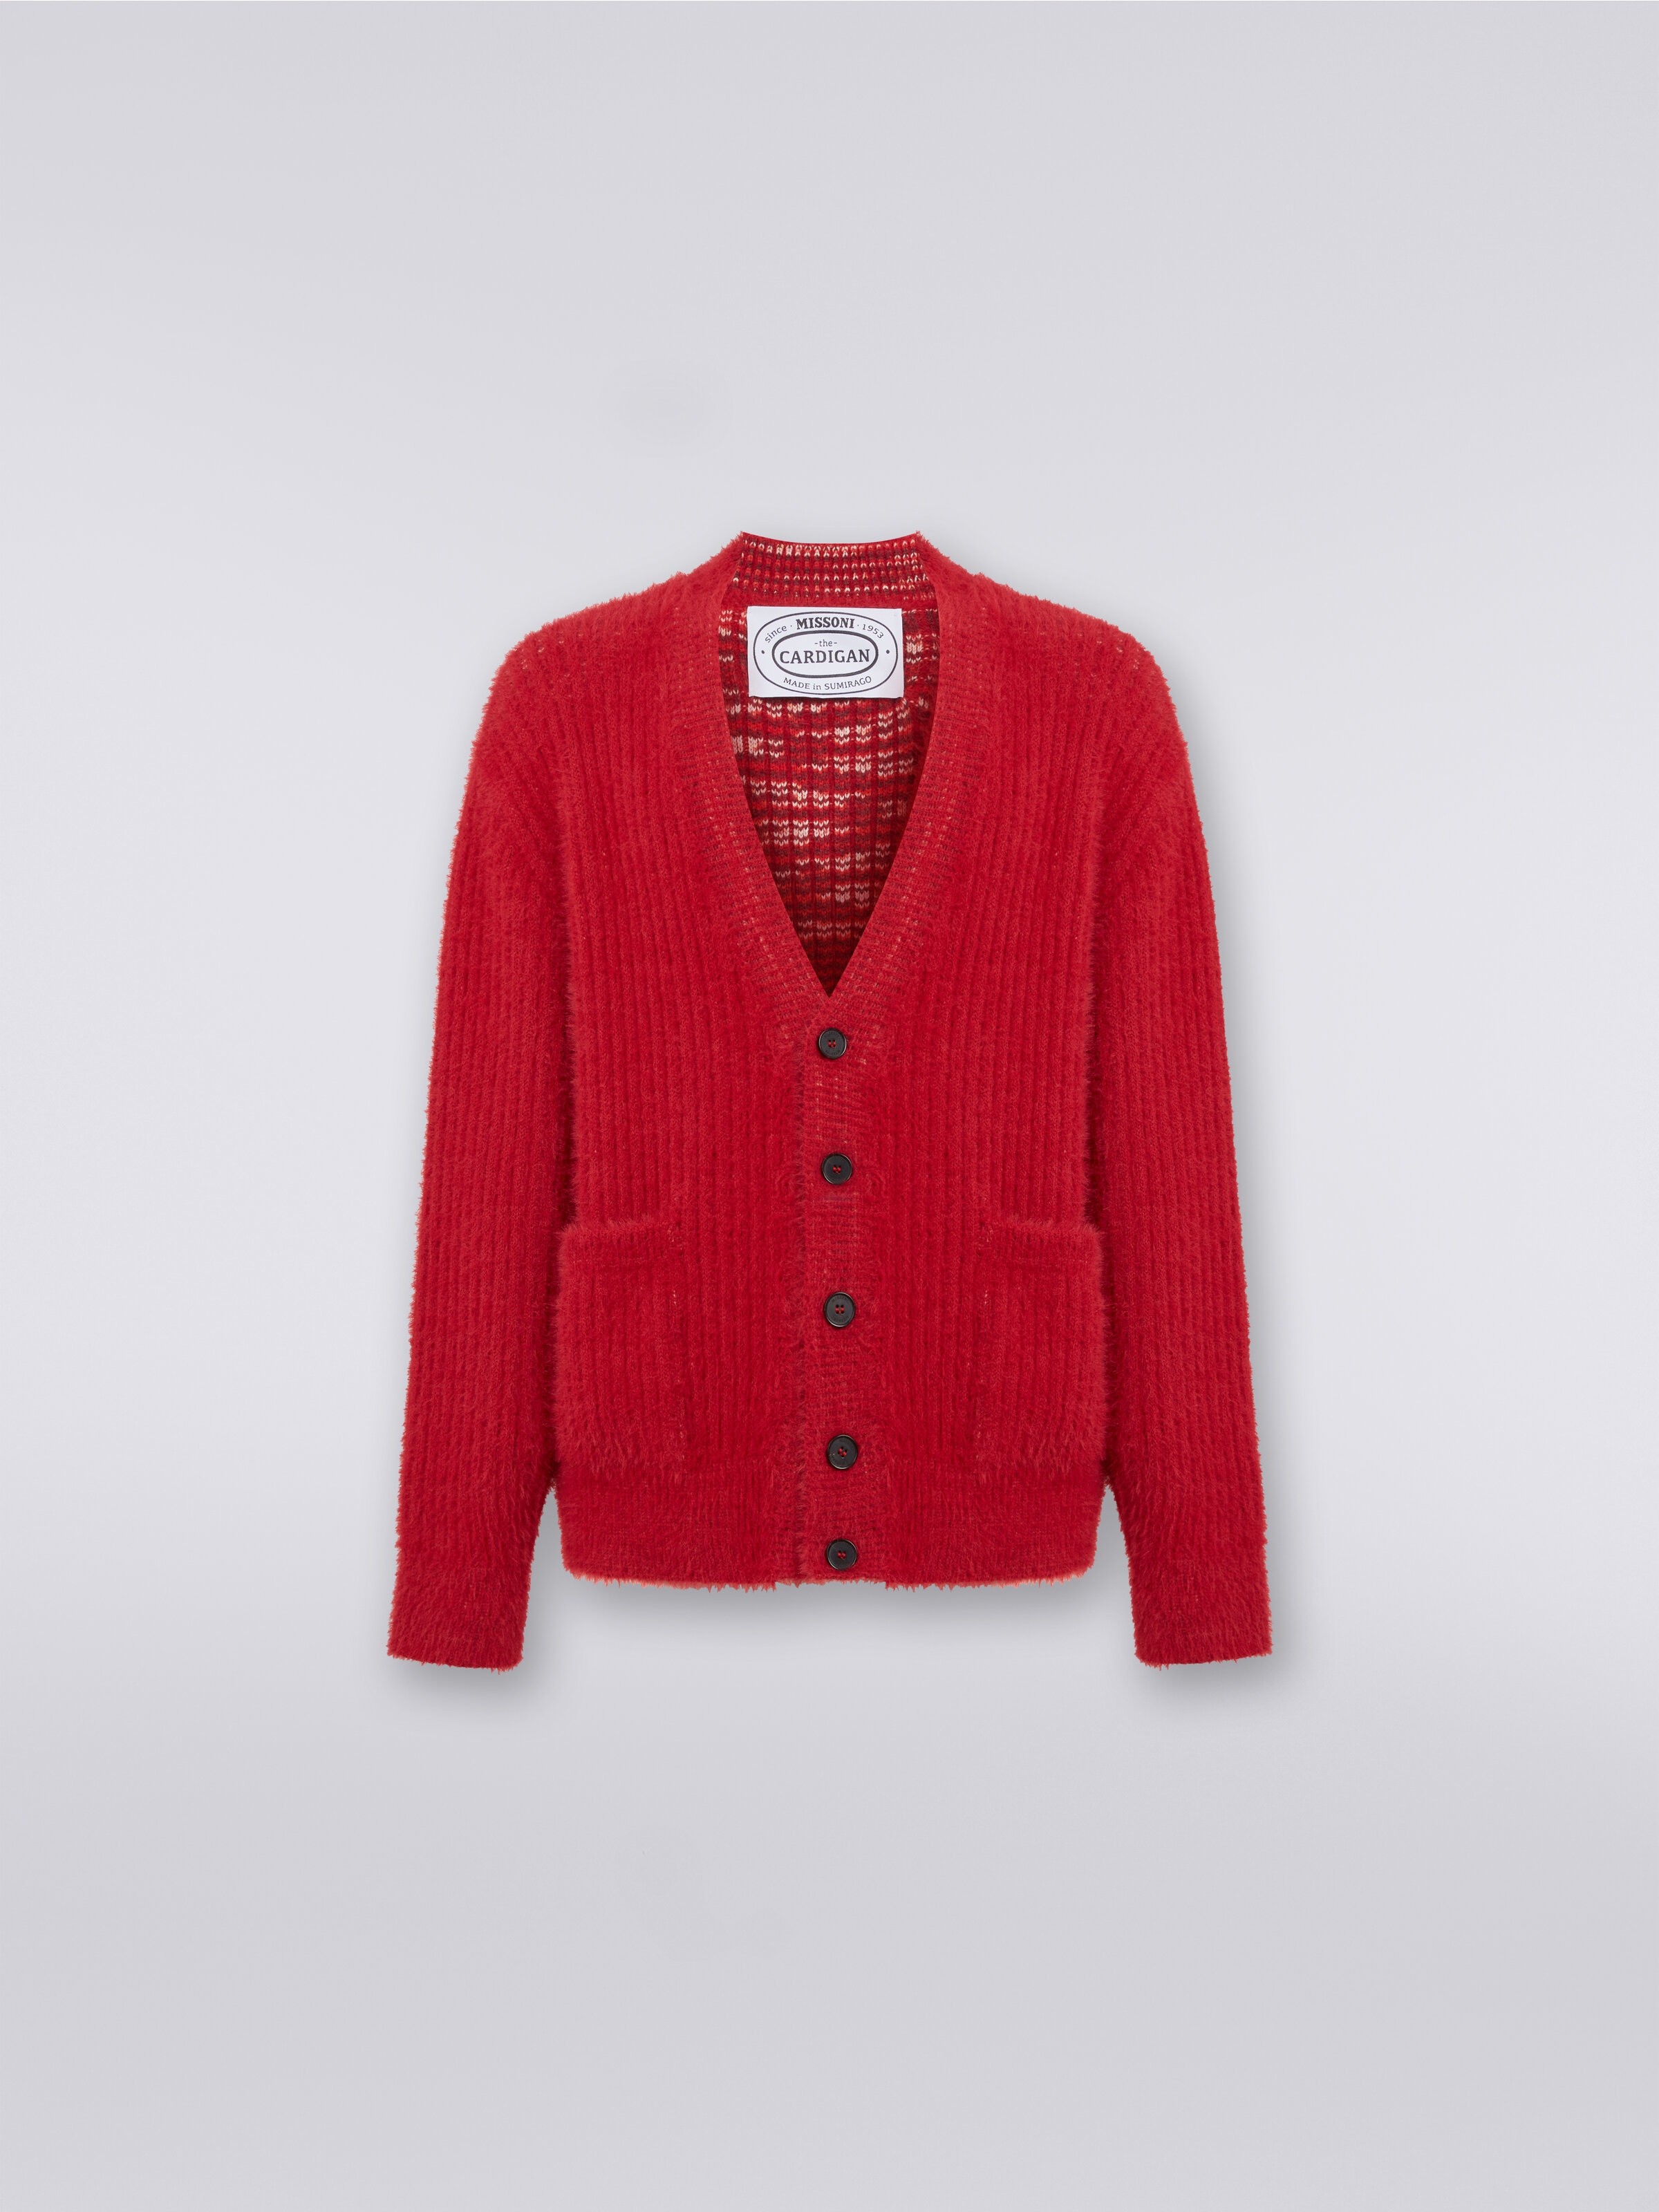 Oversized cardigan in fur-effect wool blend, Red  - 0